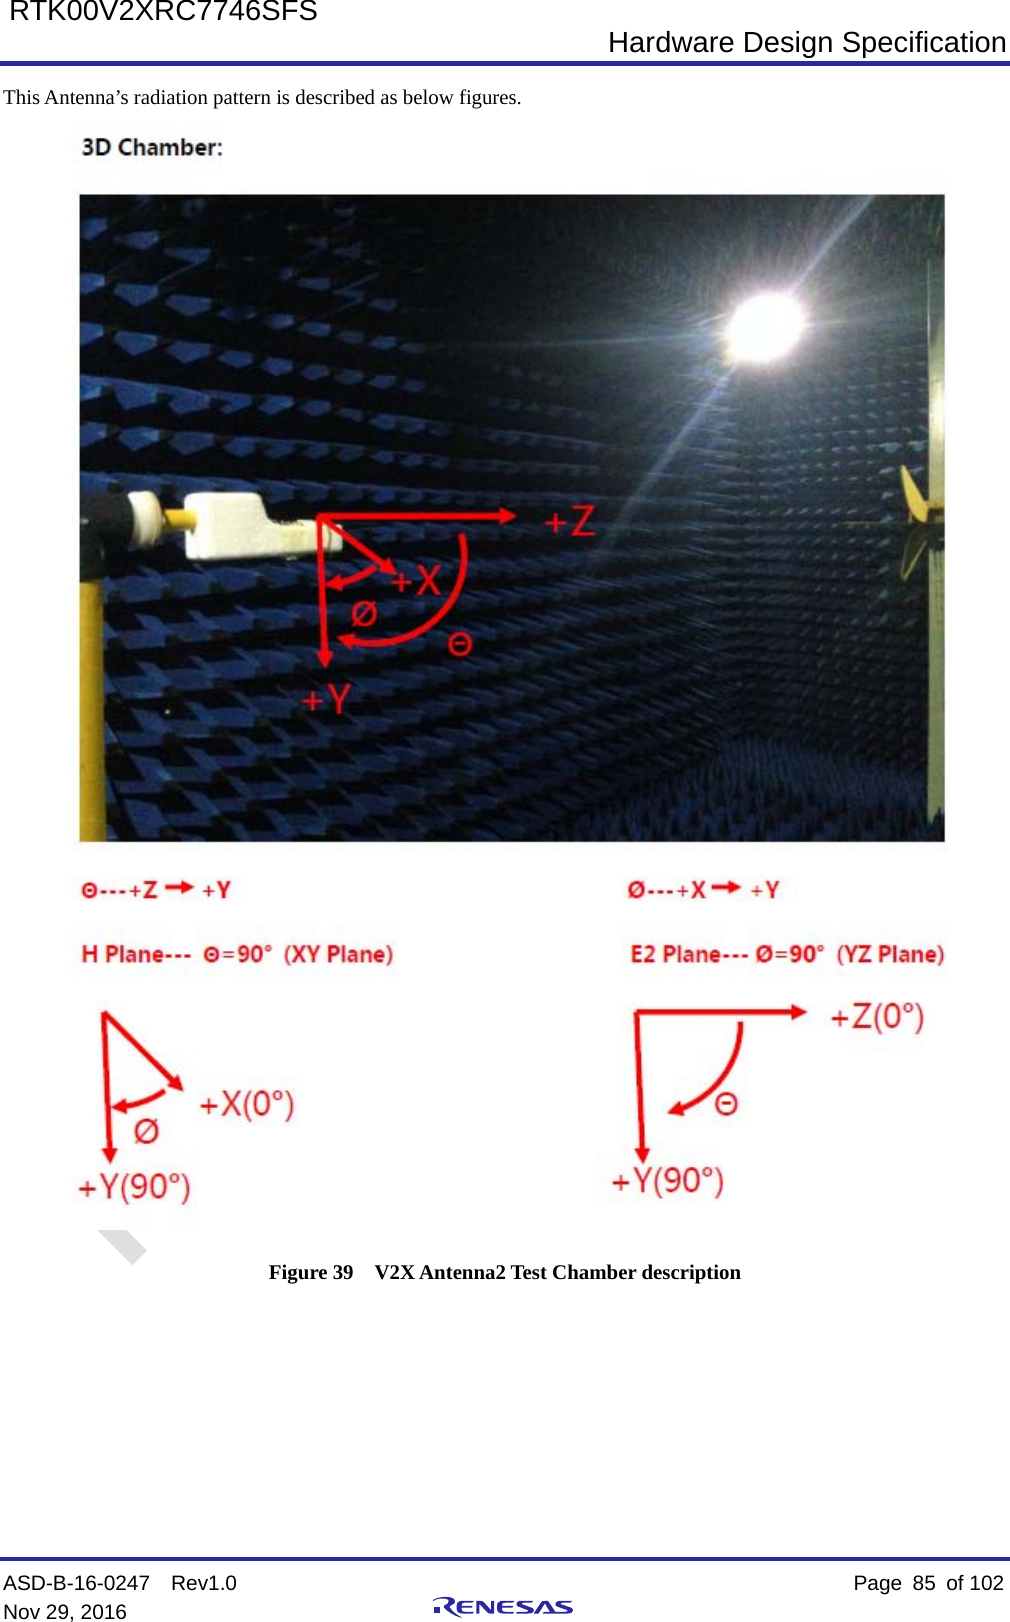  Hardware Design Specification ASD-B-16-0247  Rev1.0    Page  85 of 102 Nov 29, 2016     RTK00V2XRC7746SFS This Antenna’s radiation pattern is described as below figures.  Figure 39  V2X Antenna2 Test Chamber description       